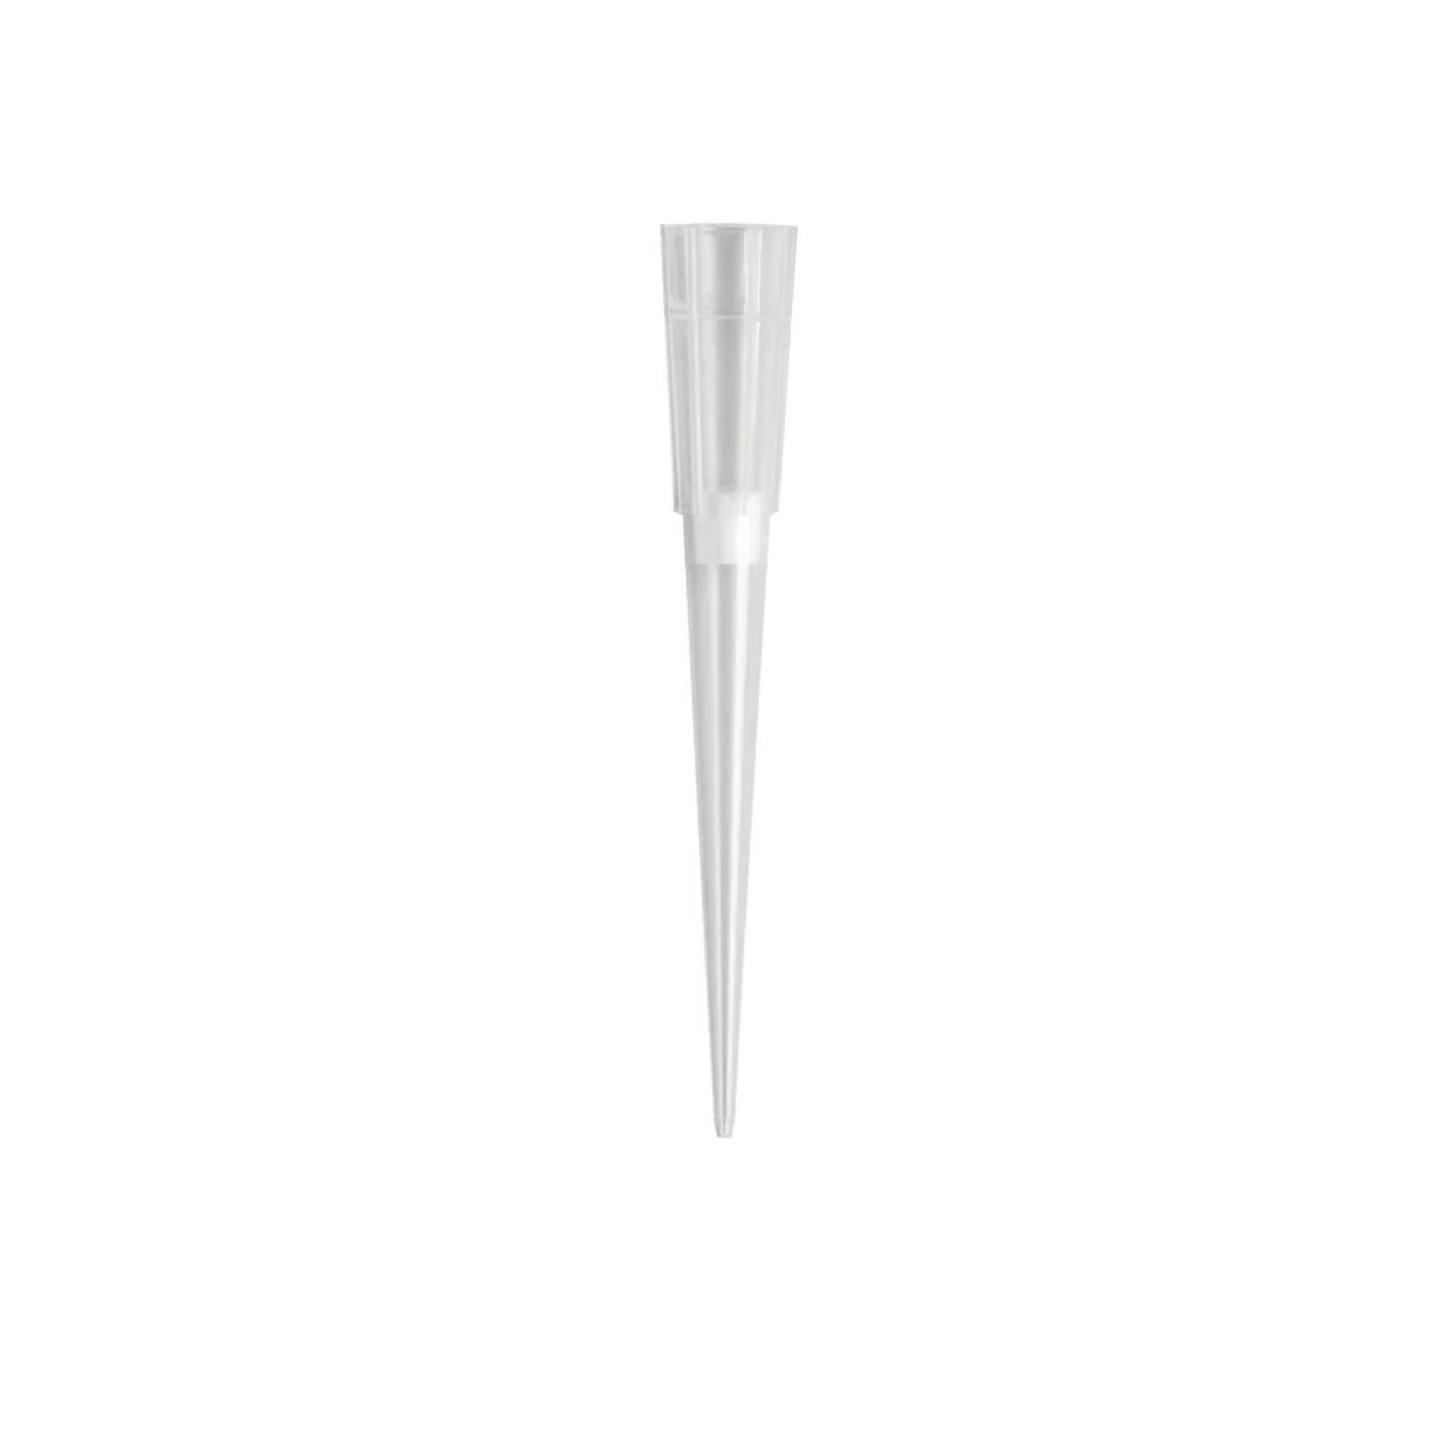 Fisherbrand SureOne 100μL Aerosol Barrier Pipette Tips, Pack of 960 (02-707-431)